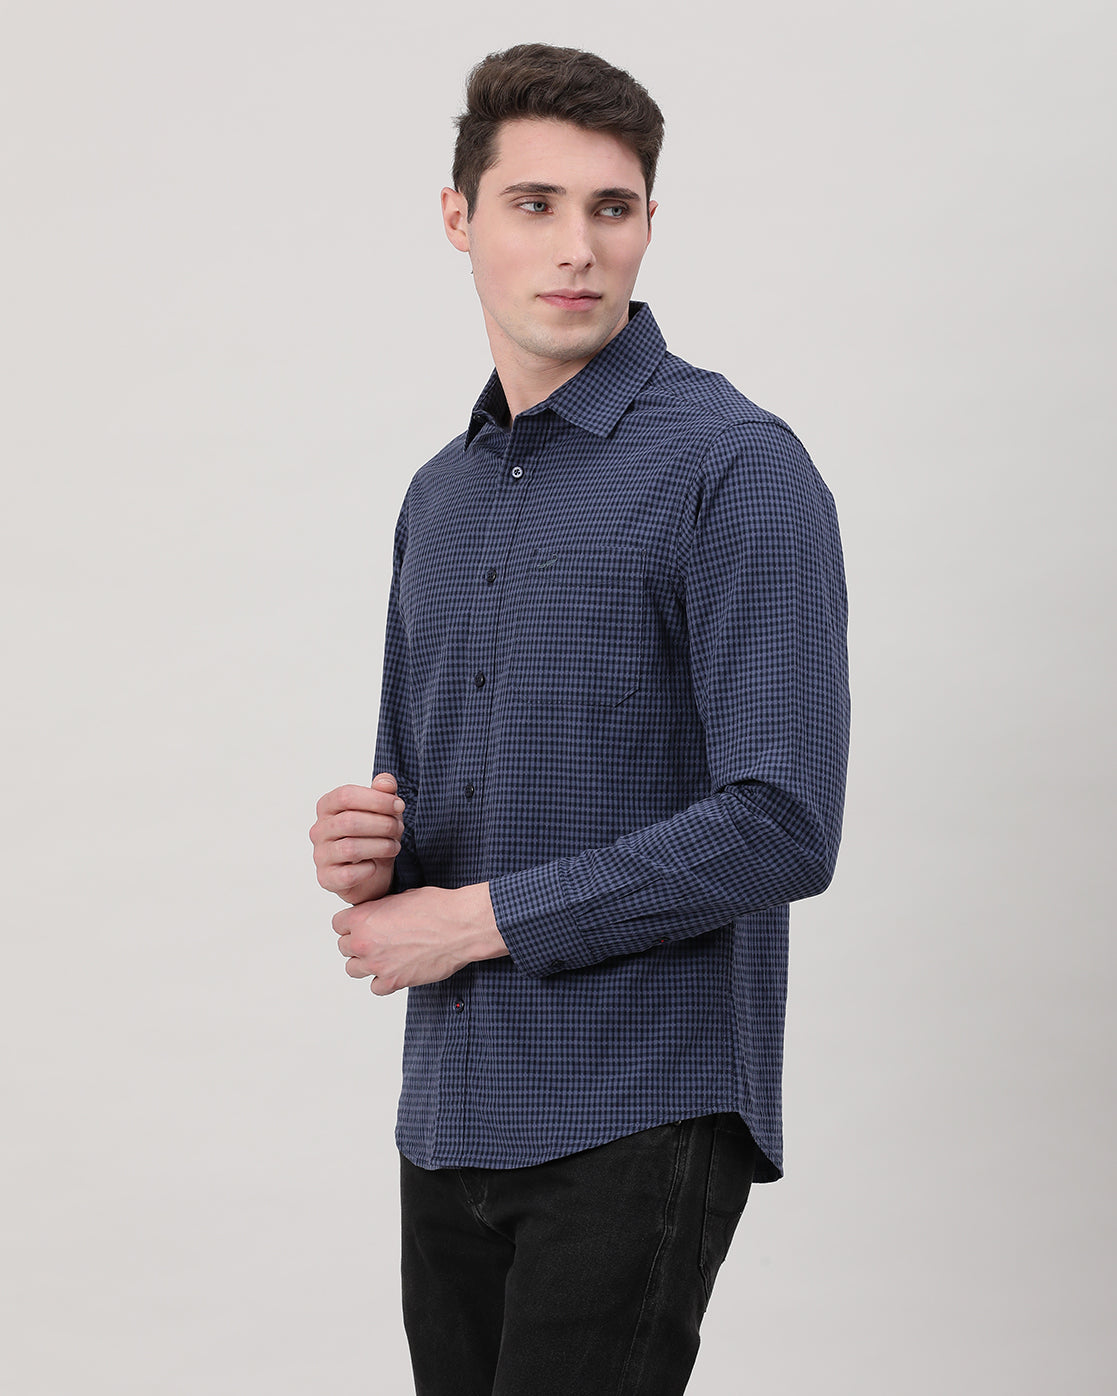 Casual Navy Full Sleeve Comfort Fit Checks Shirt with Collar for Men